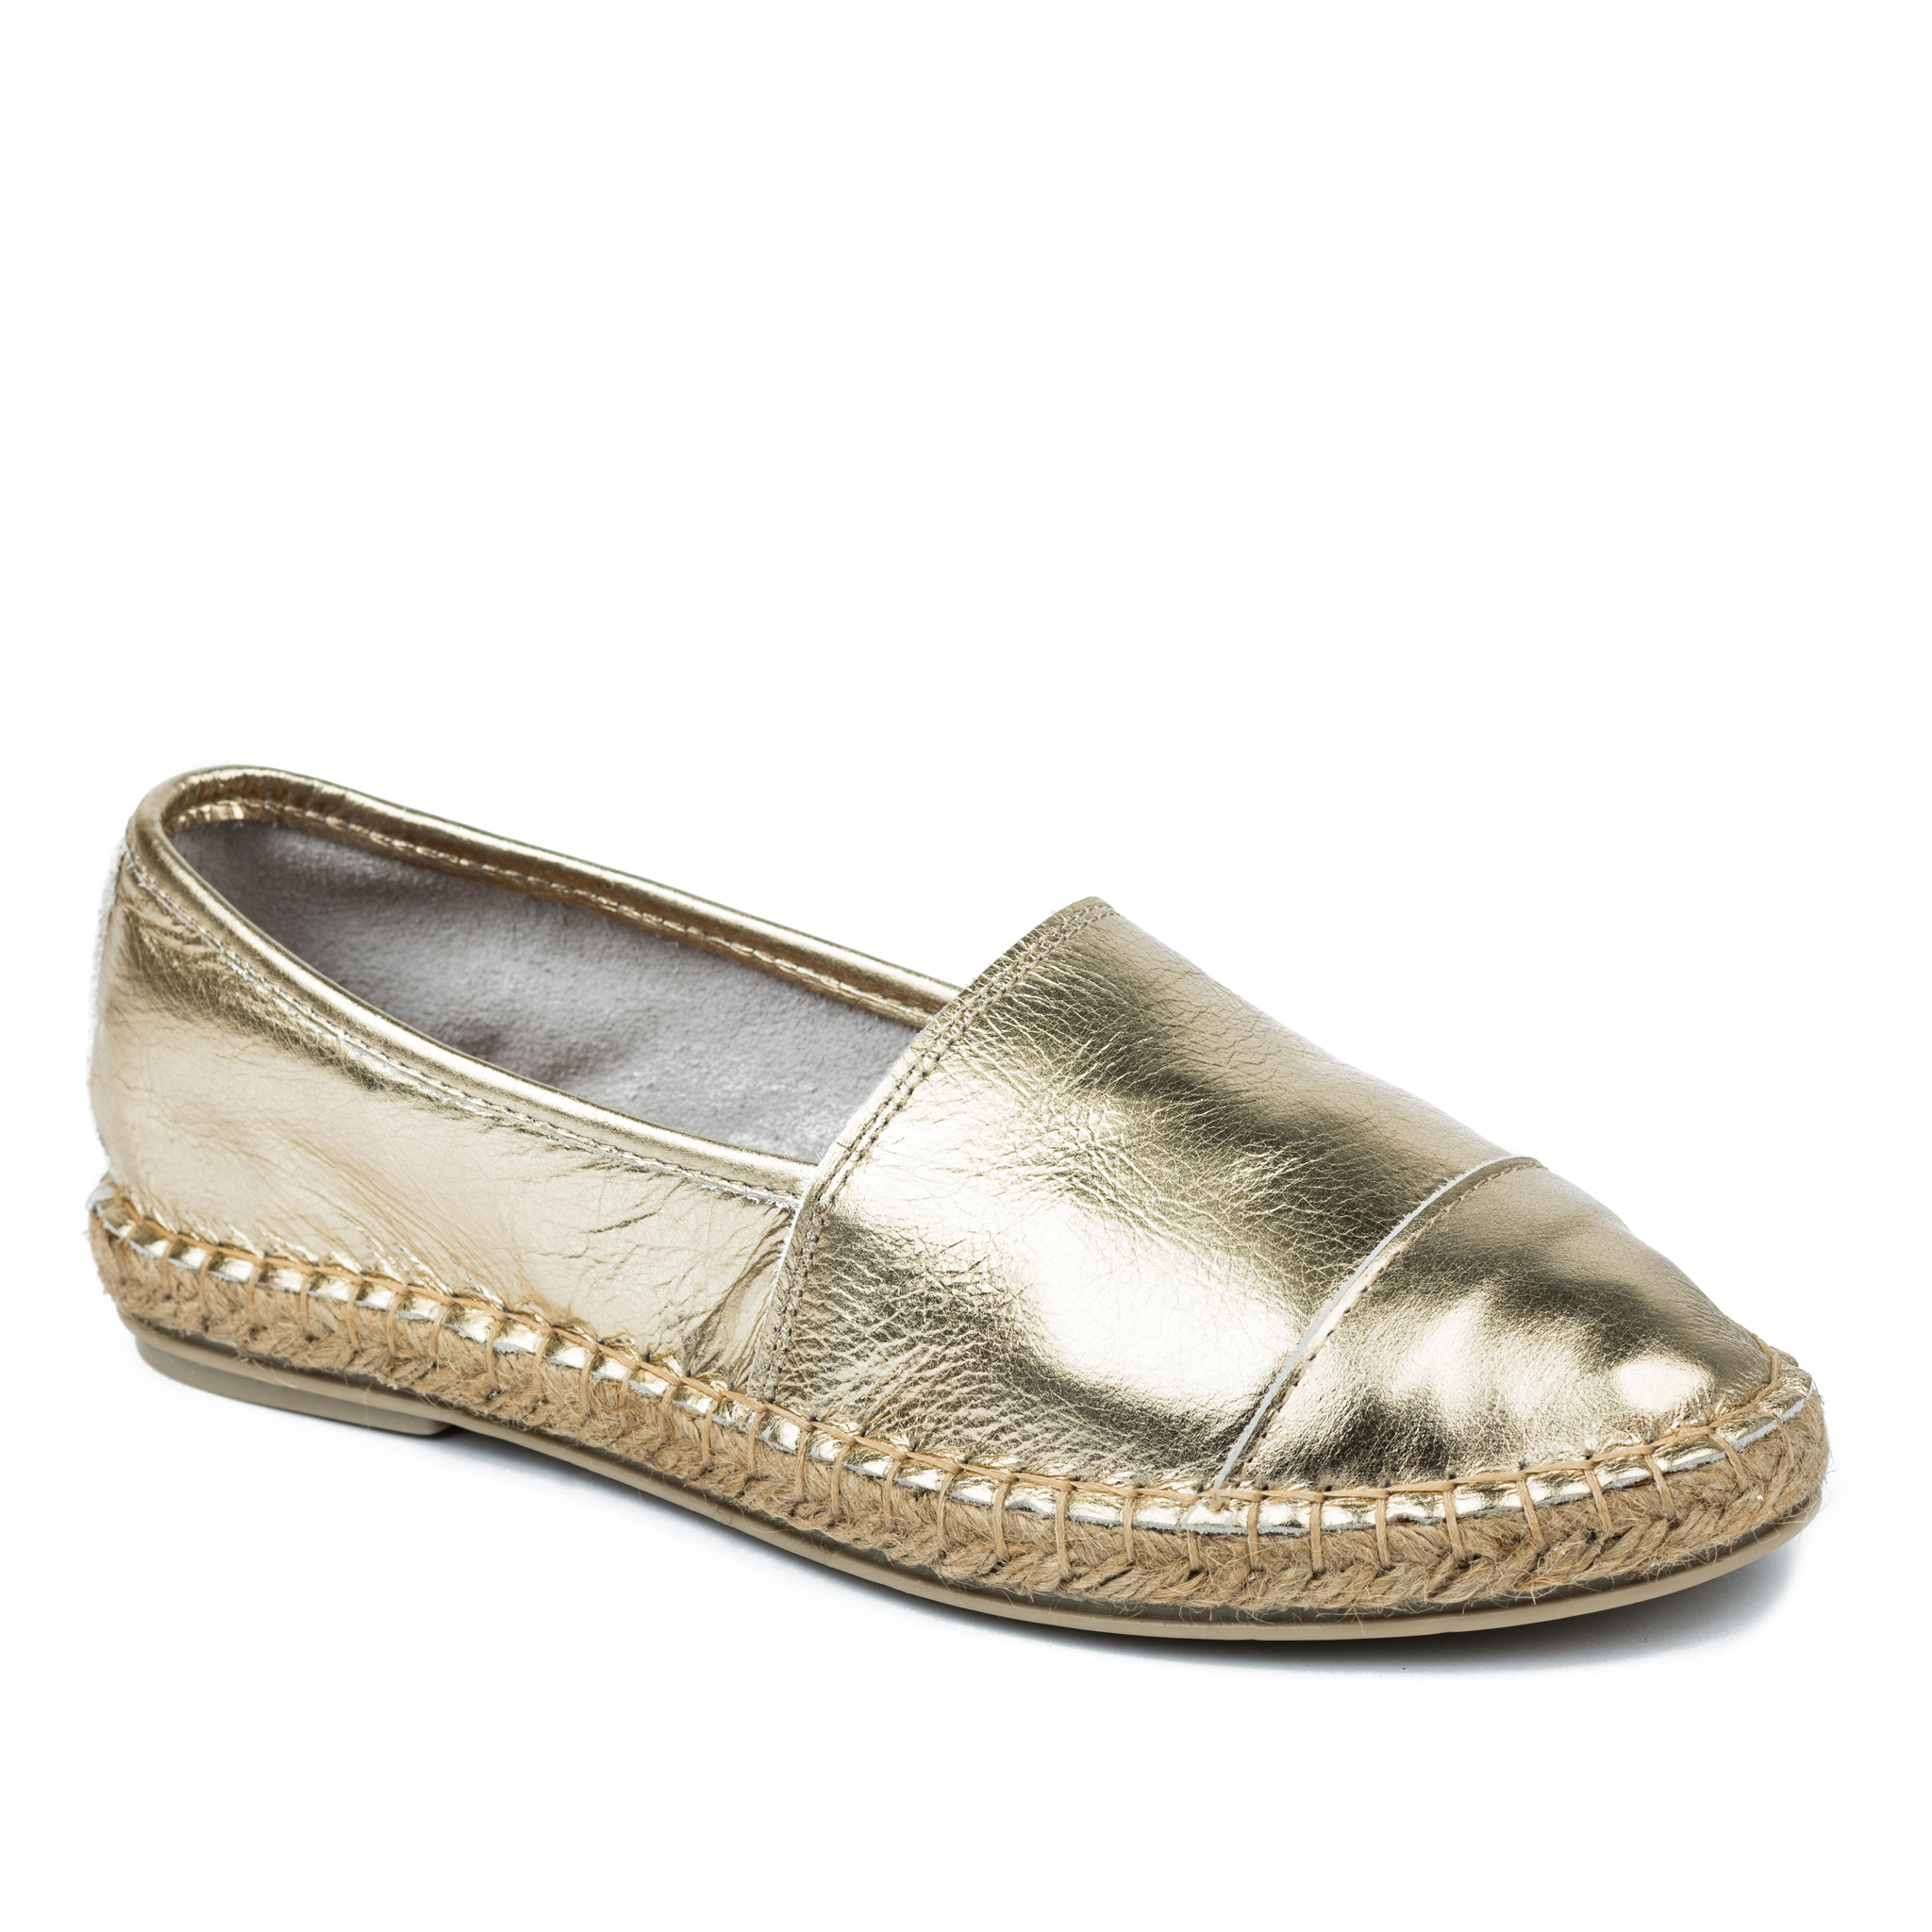 Leather espadrilles A579 - GOLD